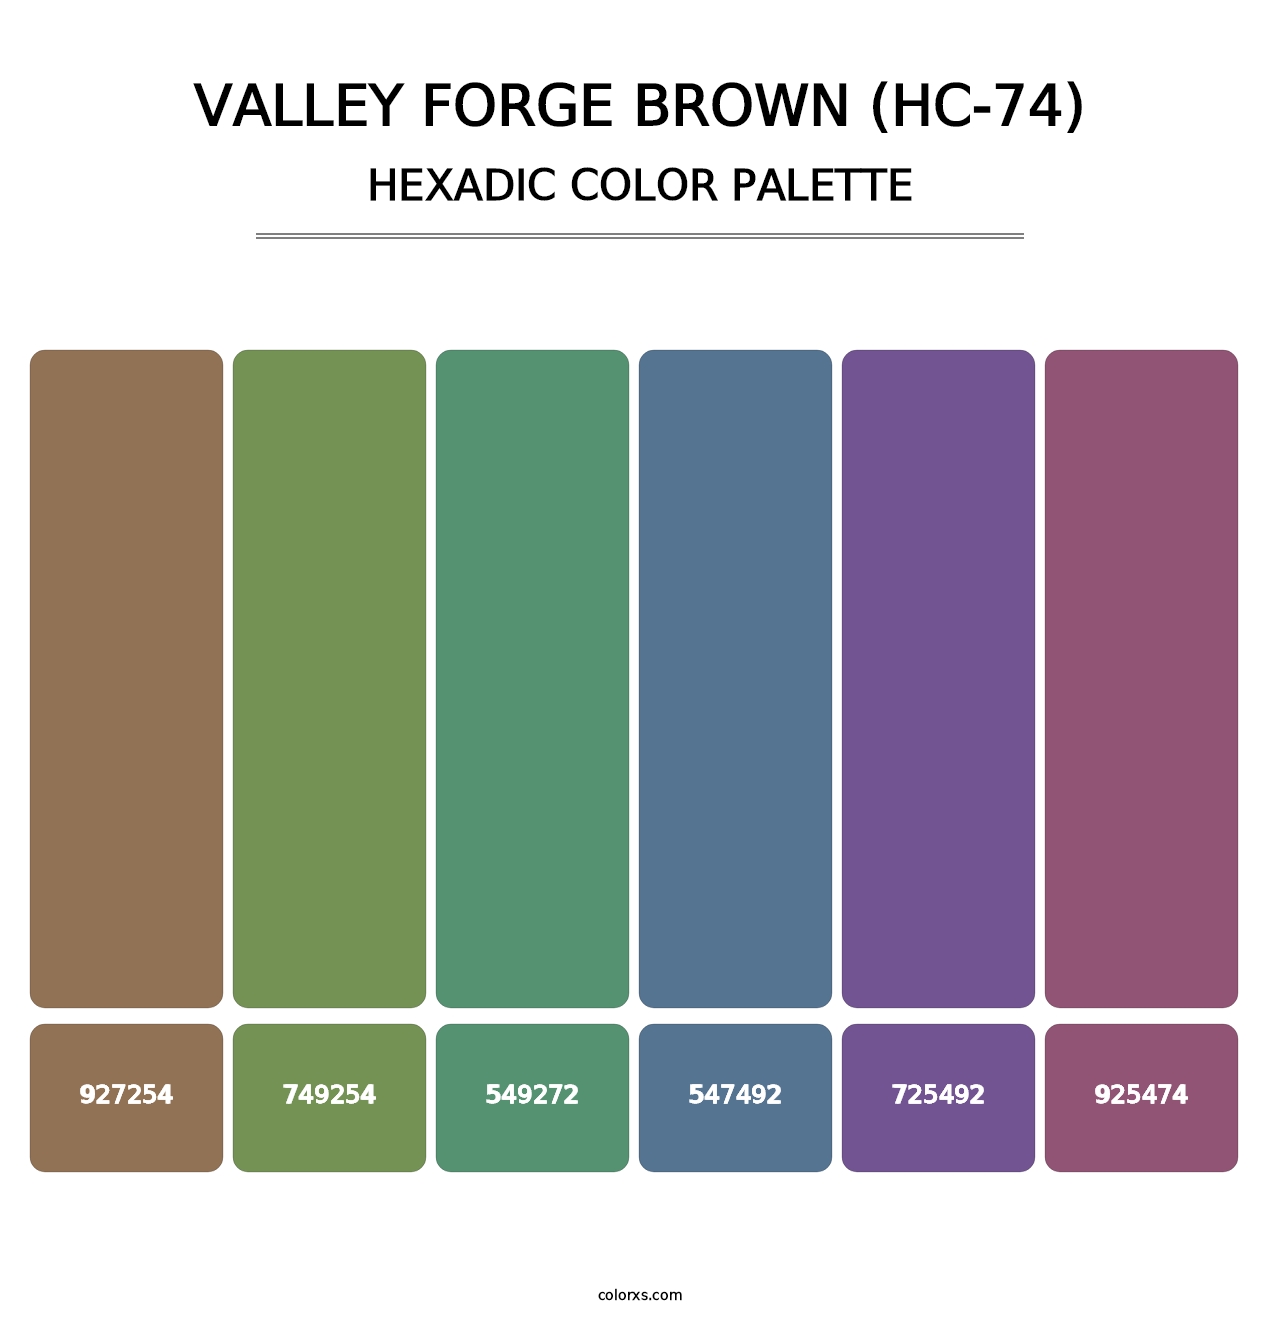 Valley Forge Brown (HC-74) - Hexadic Color Palette